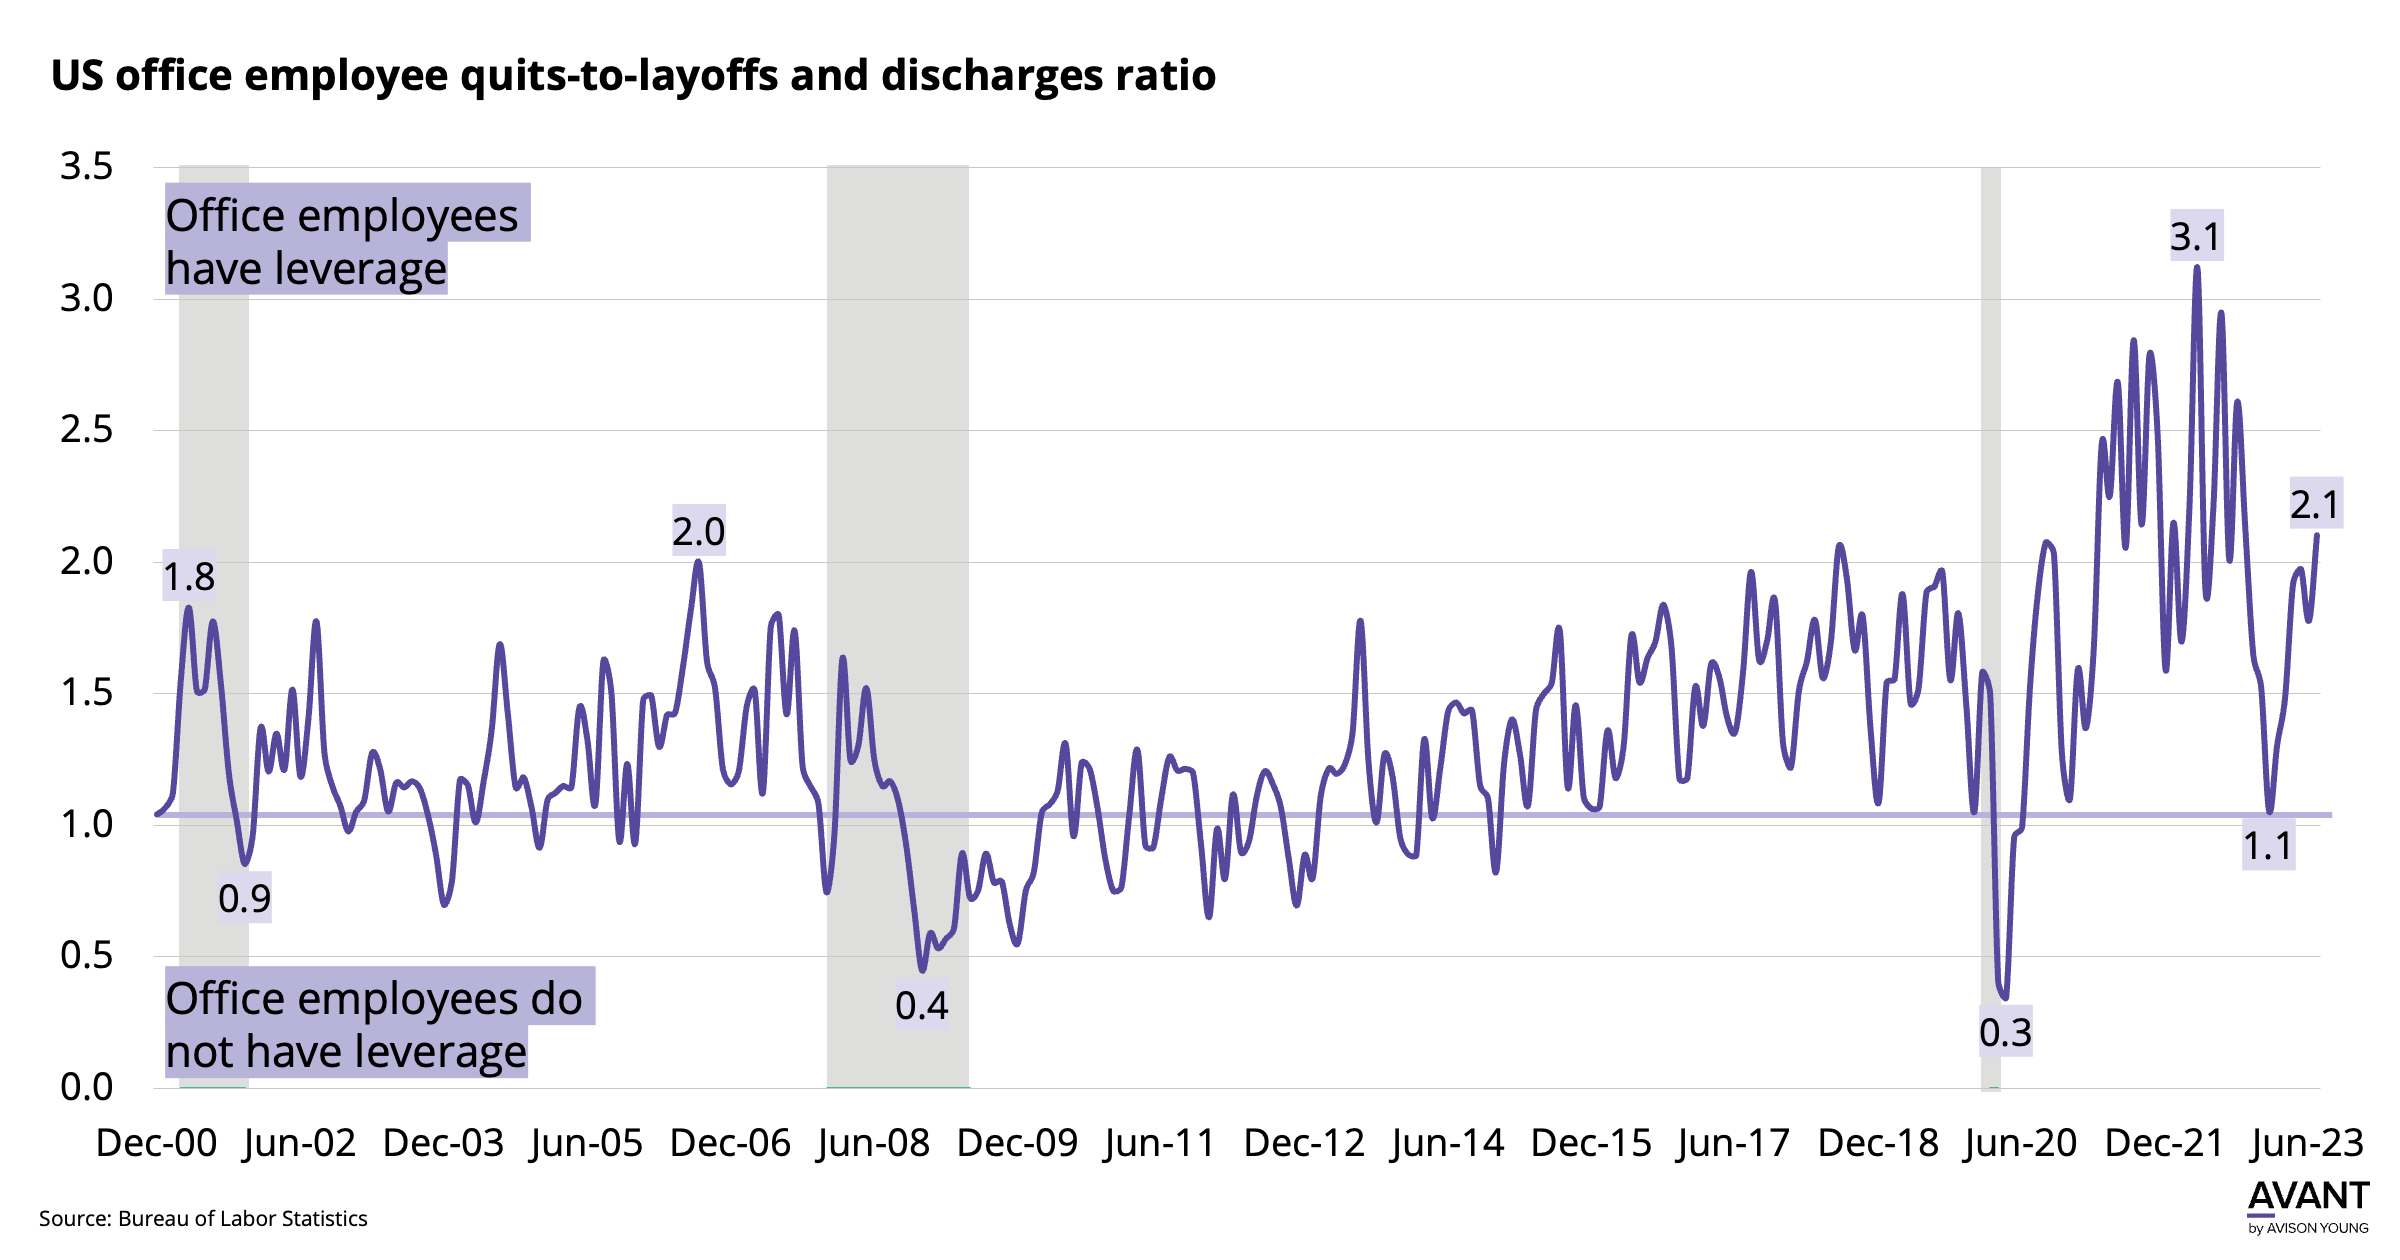 US office employee quits-to-layoffs and discharges ratio